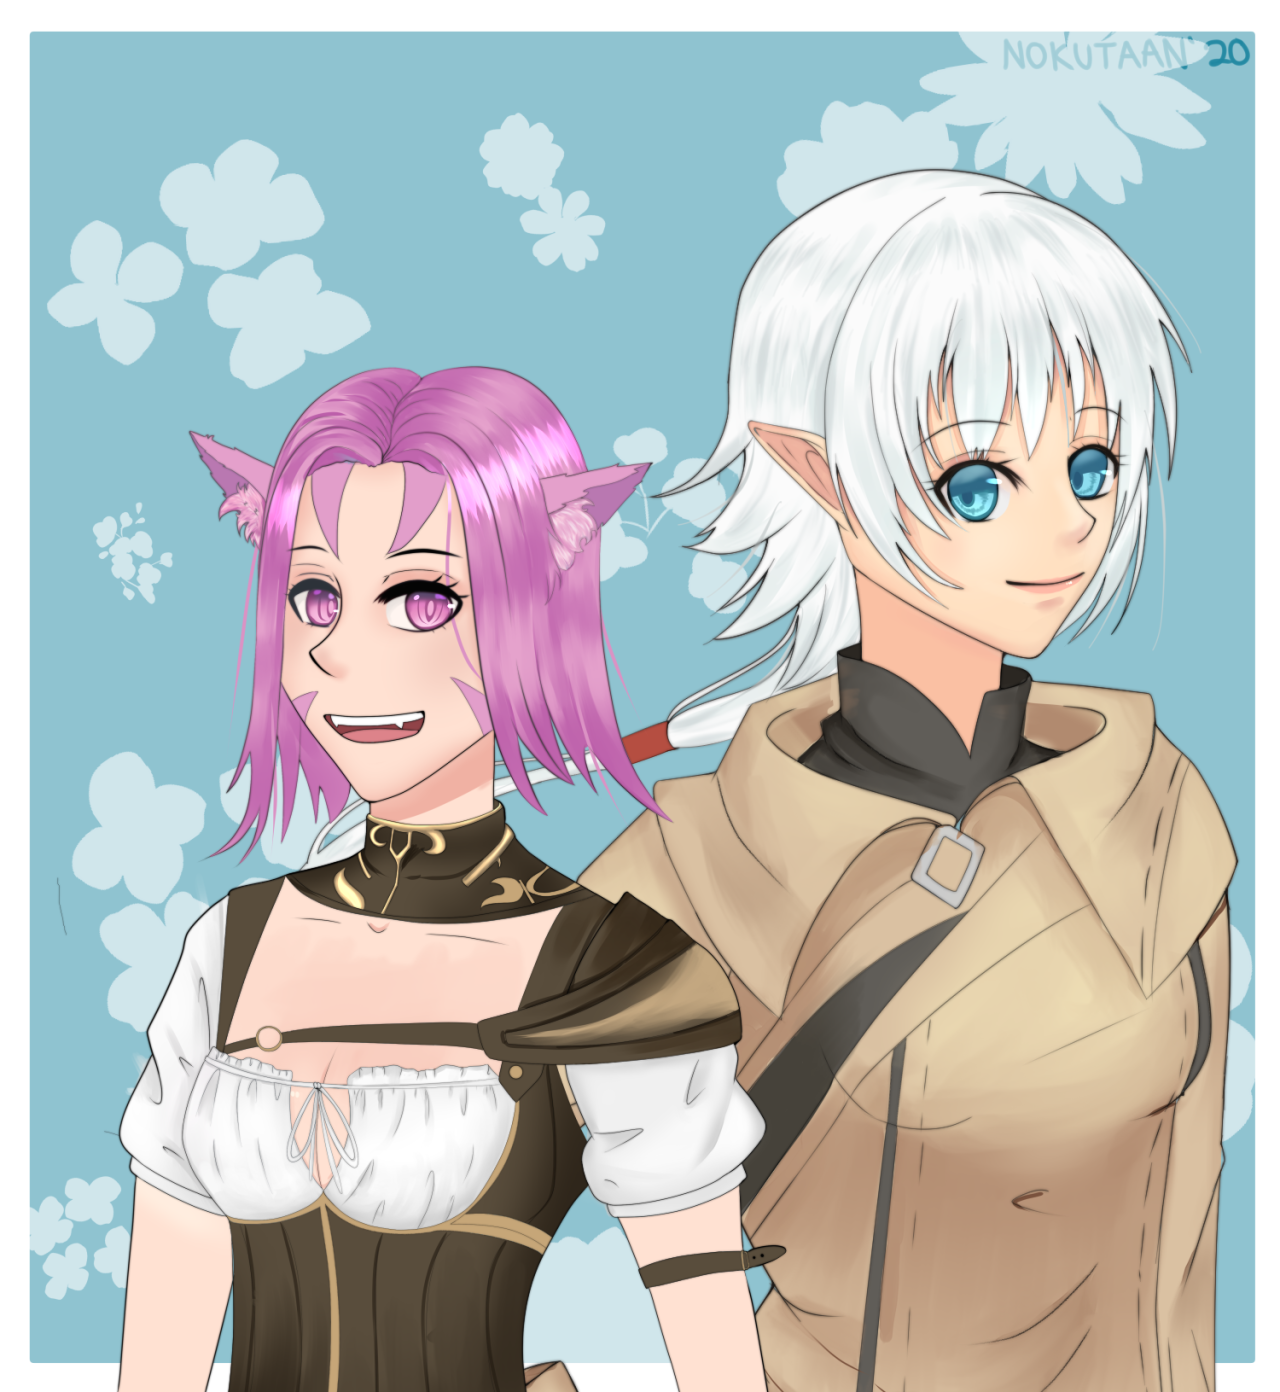 Alisaie X Wol : emet selch on Tumblr : View an image ...